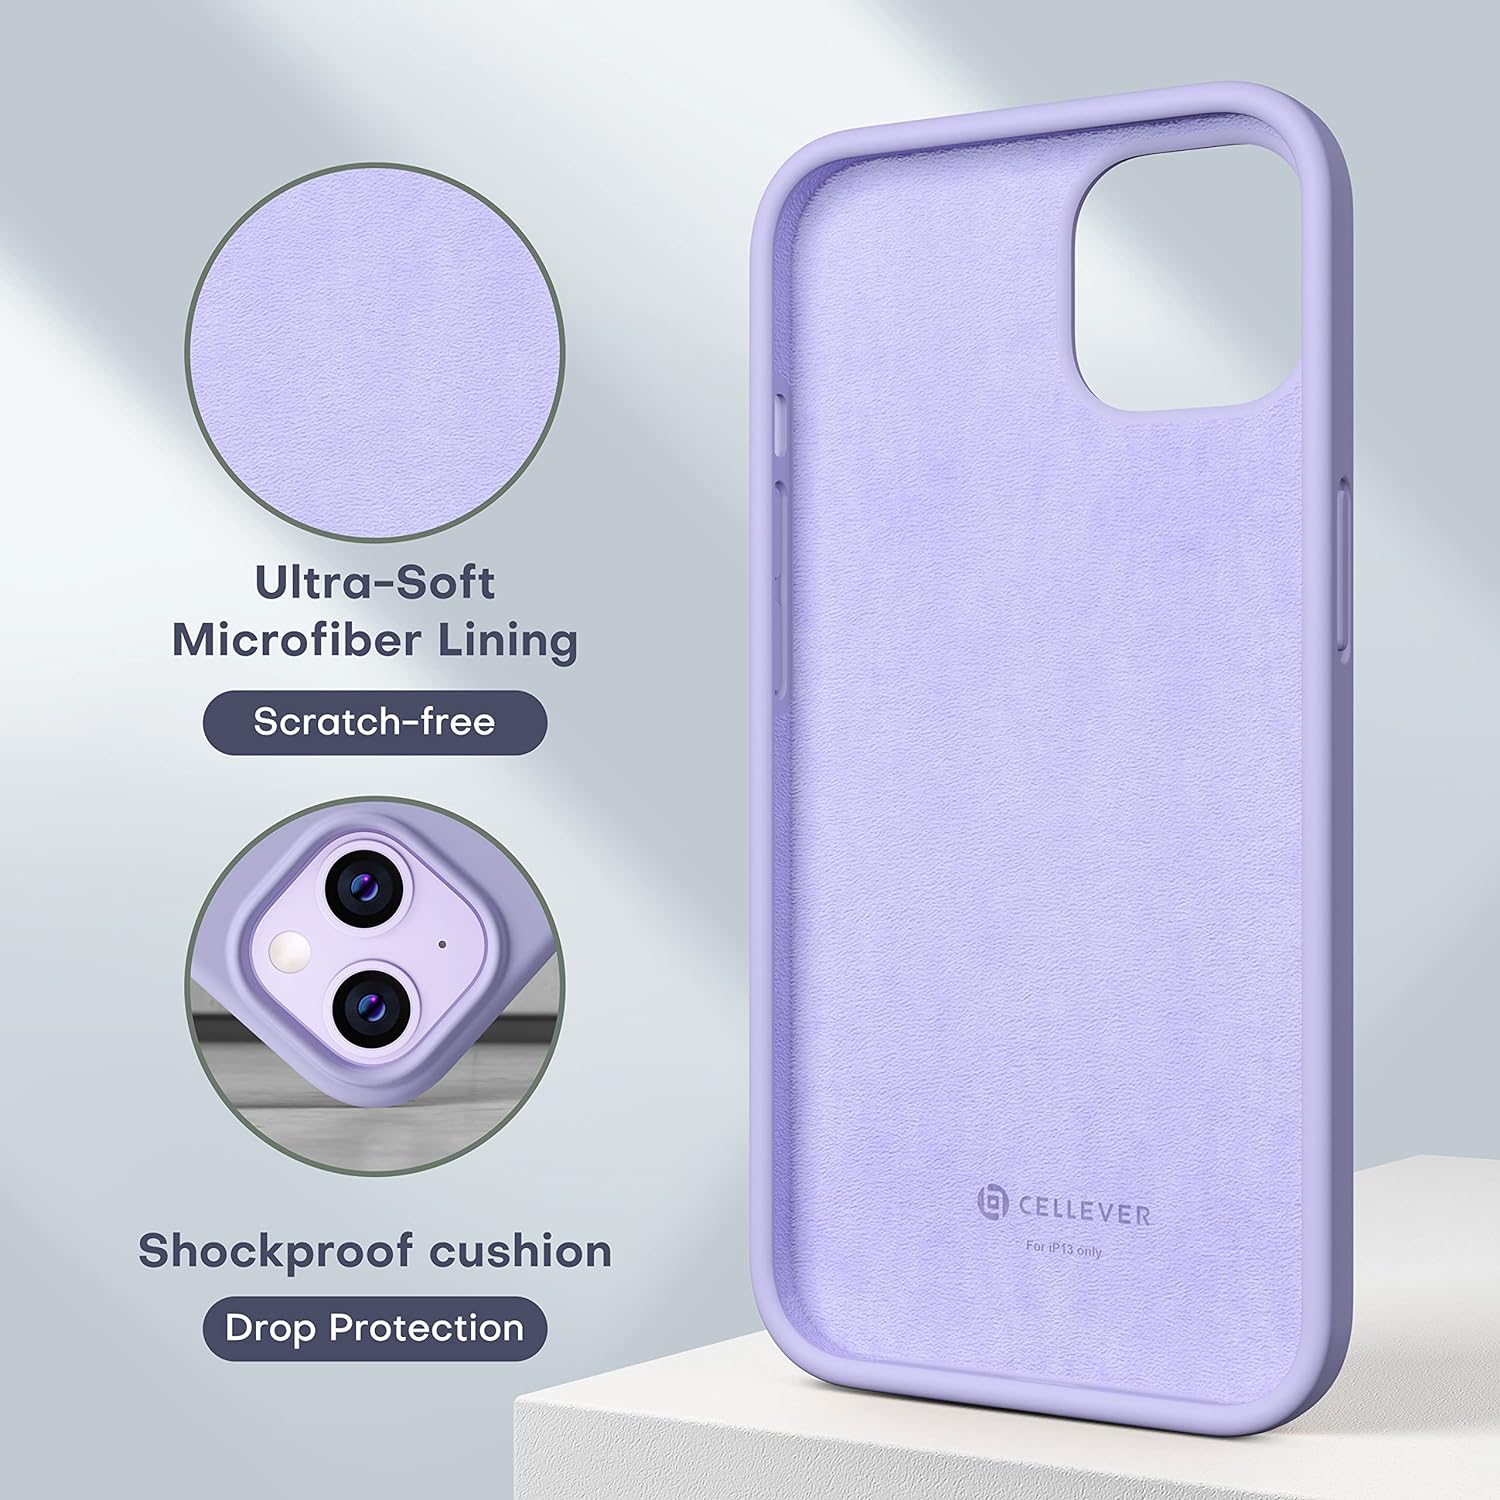 CellEver Silicone Case for iPhone 13, Slim Shockproof Case with Soft Touch Microfiber Lining Cushion (Light Purple)